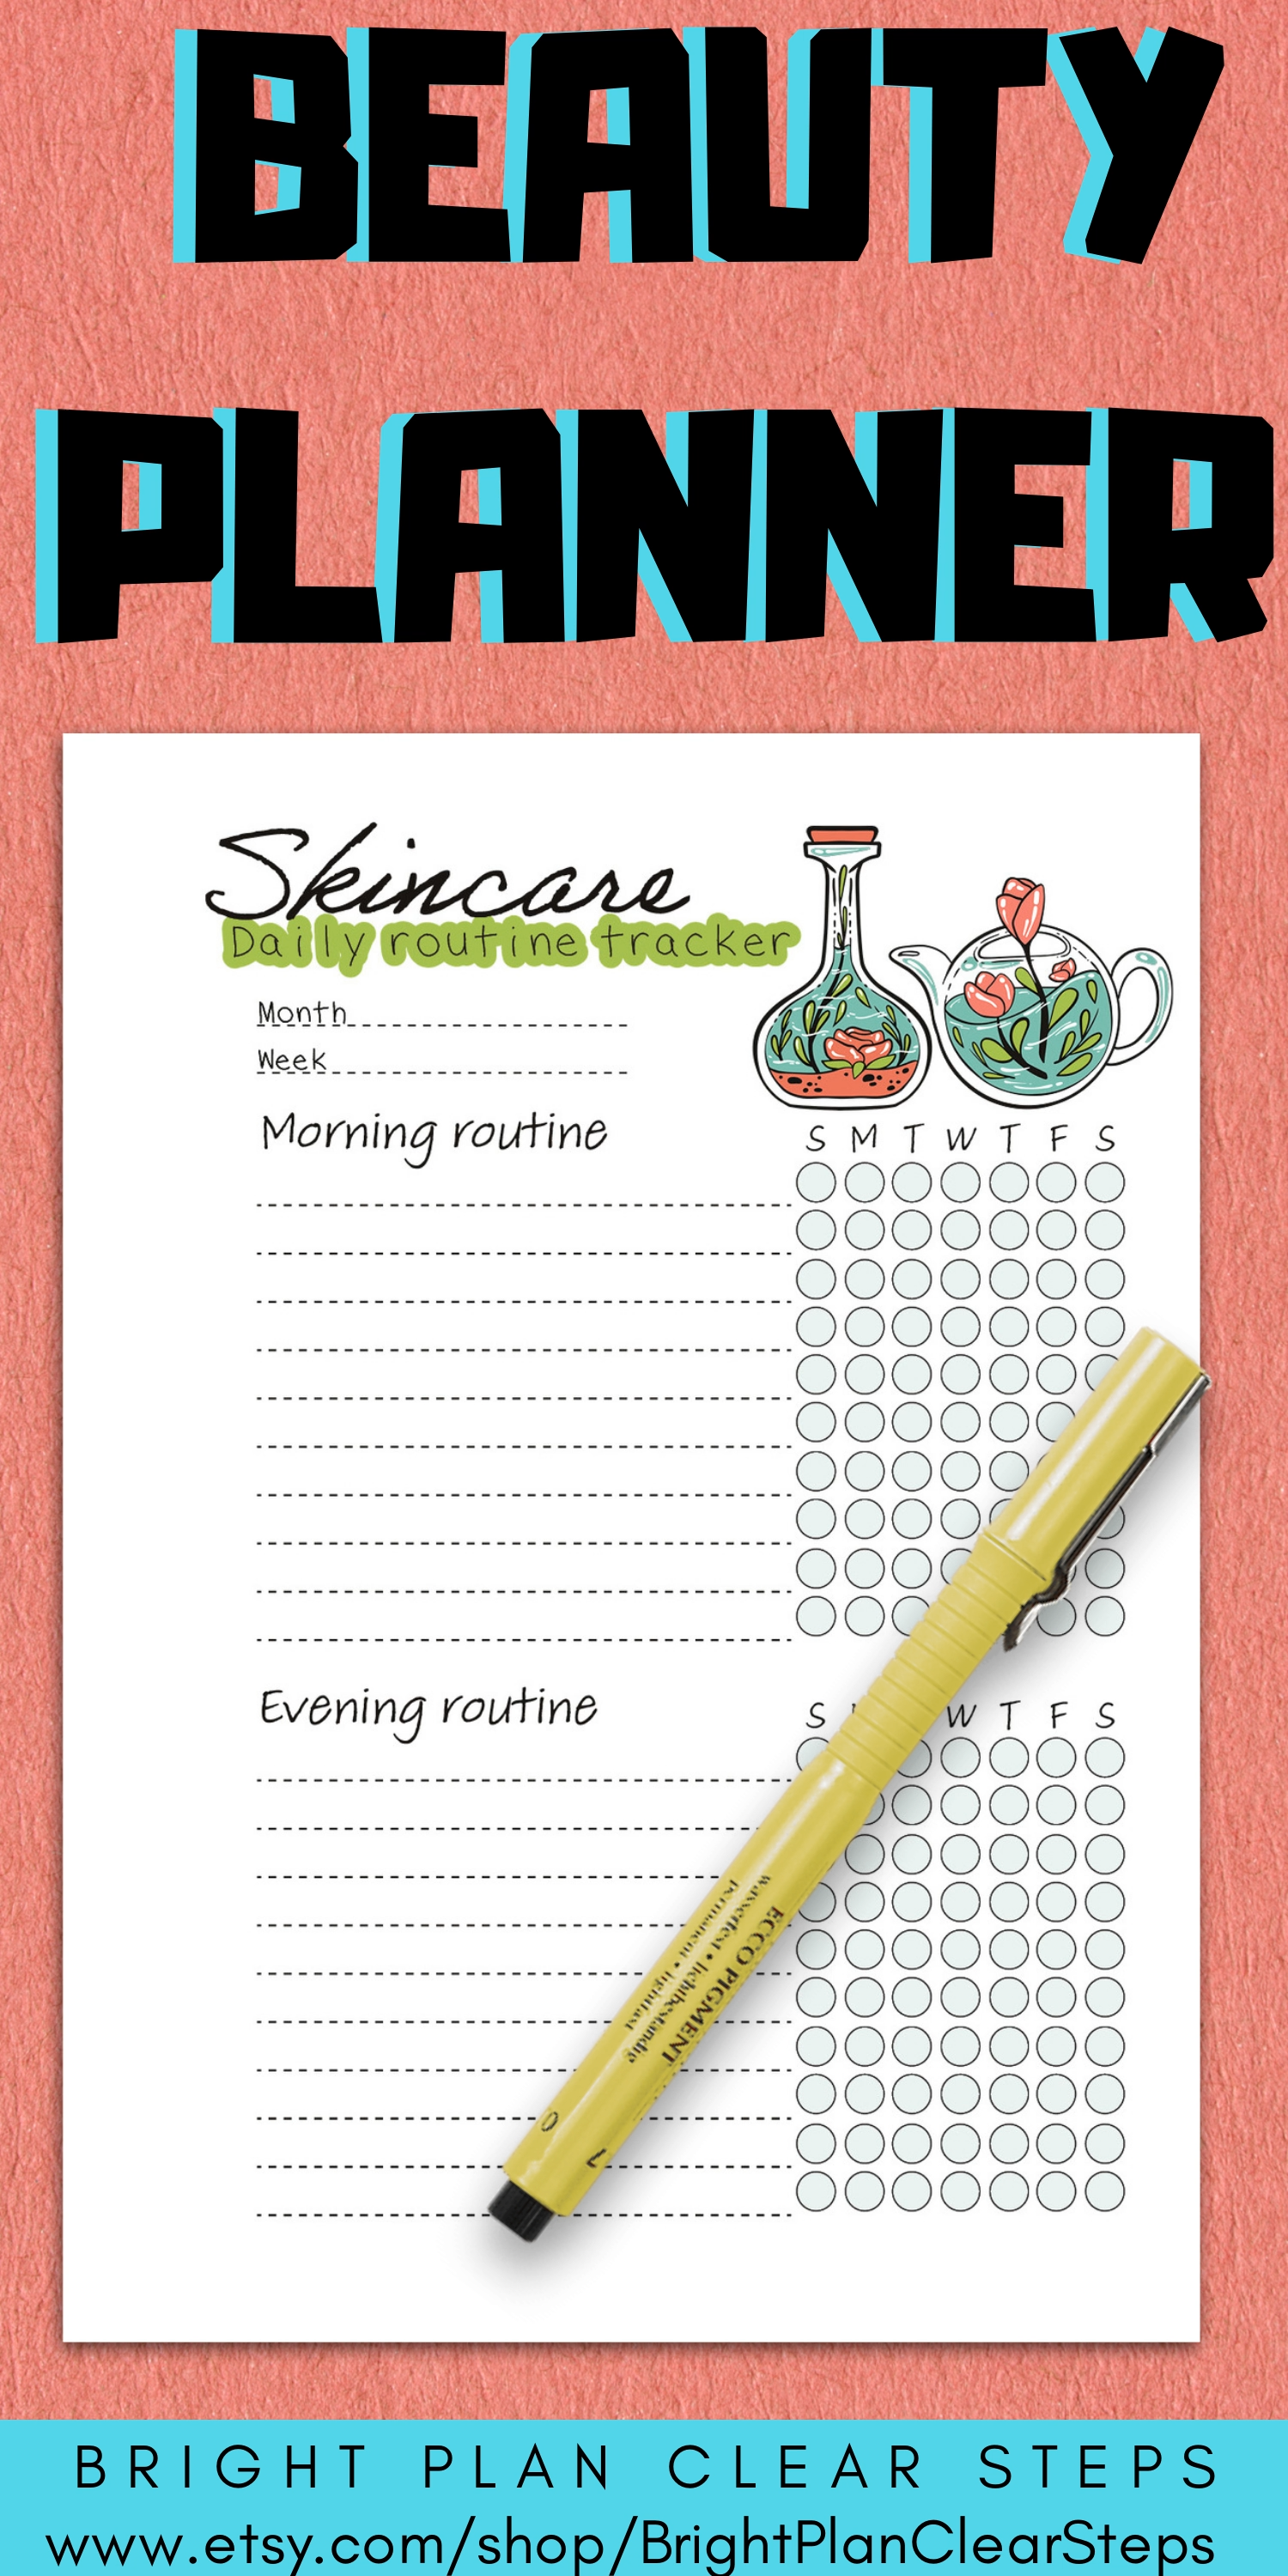 The Best Planner for your Beauty Routine. Skincare and Haircare Habit Tracker. Daily and Weekly - The Best Planner for your Beauty Routine. Skincare and Haircare Habit Tracker. Daily and Weekly -   15 beauty Routines checklist ideas